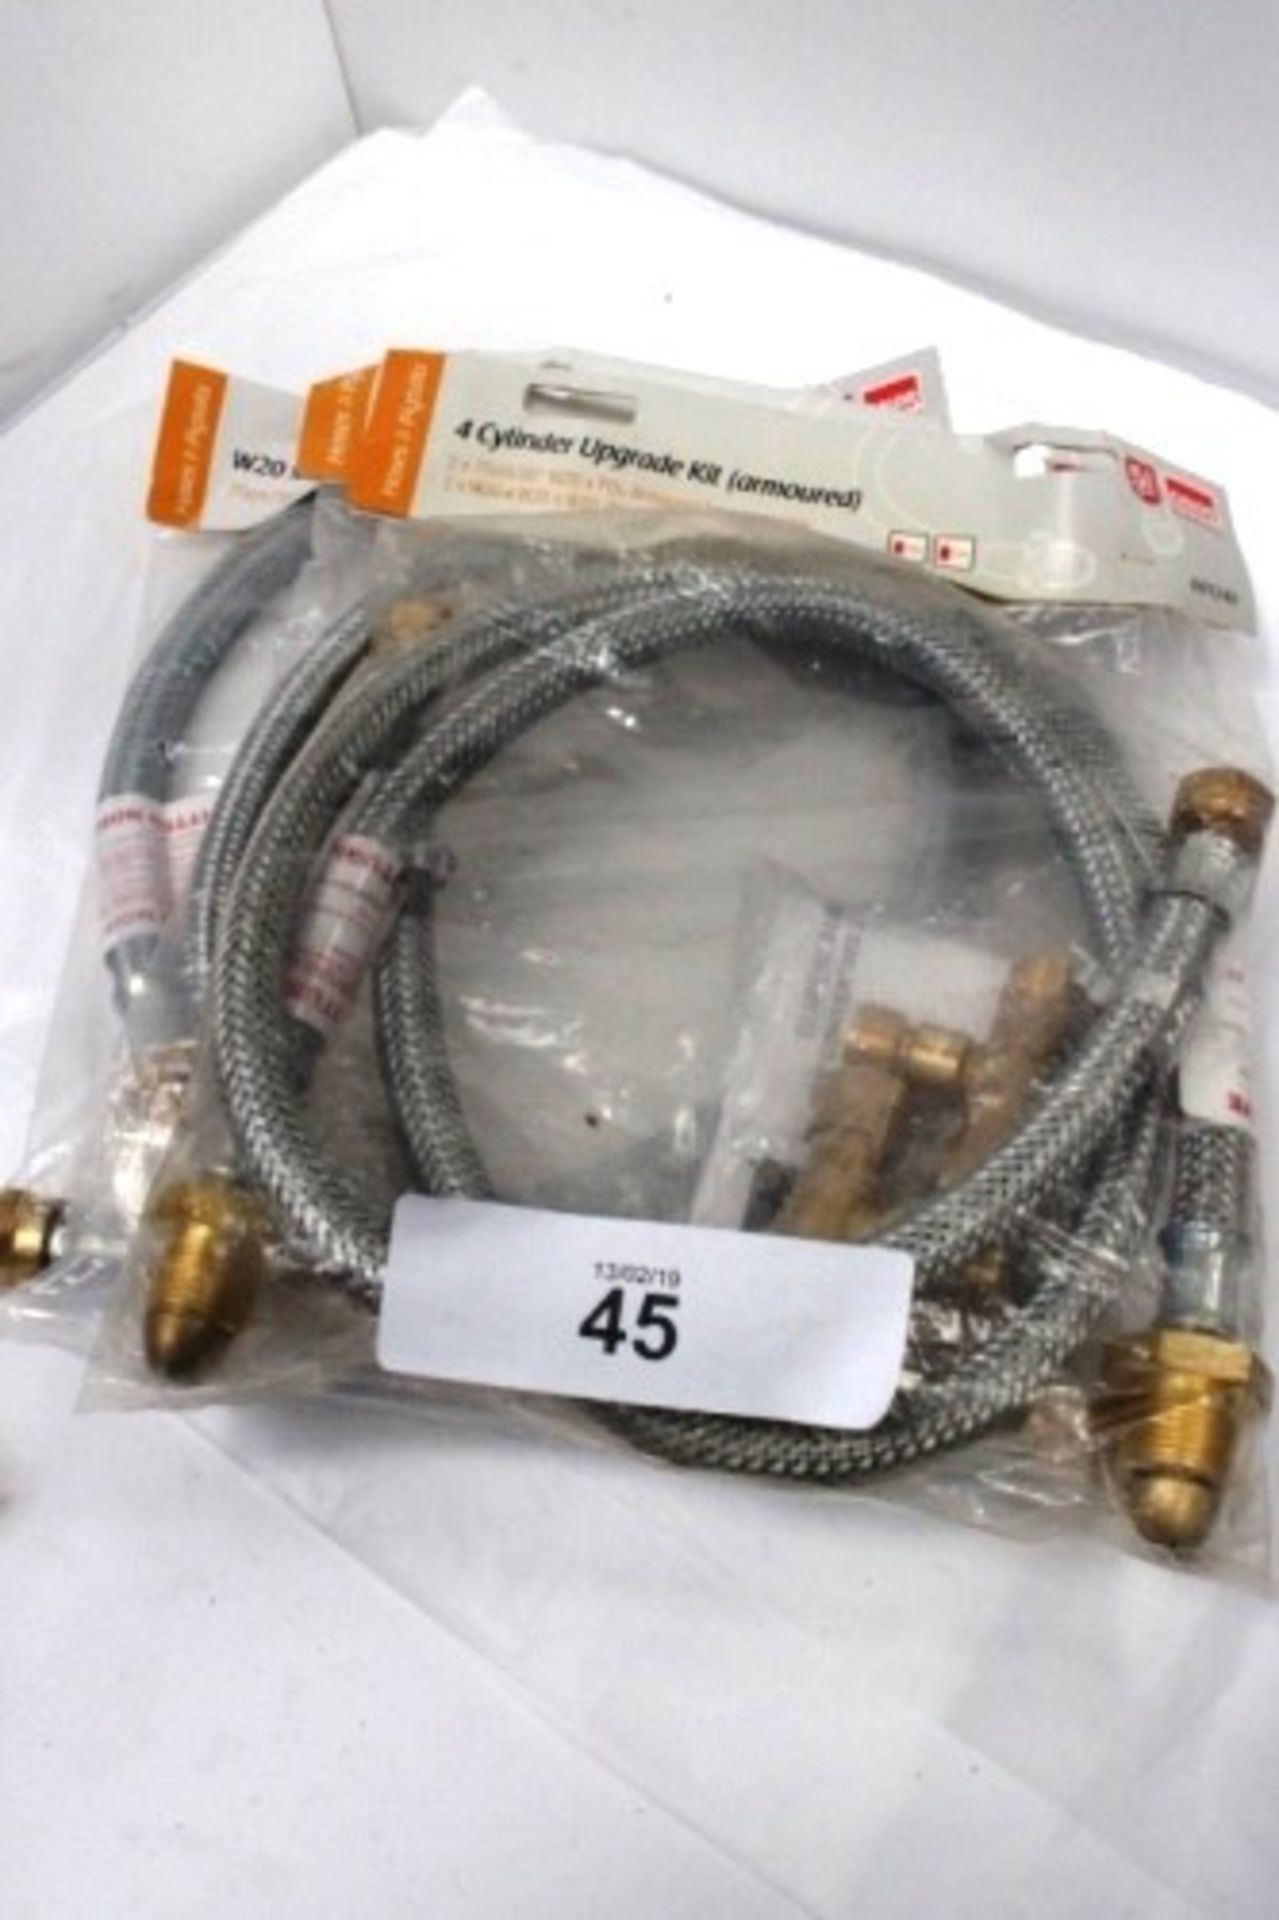 2 x Calor W20 armoured gas hoses, Ref: 601244, together with a 4 cylinder upgrade kit, Ref: 601240 -